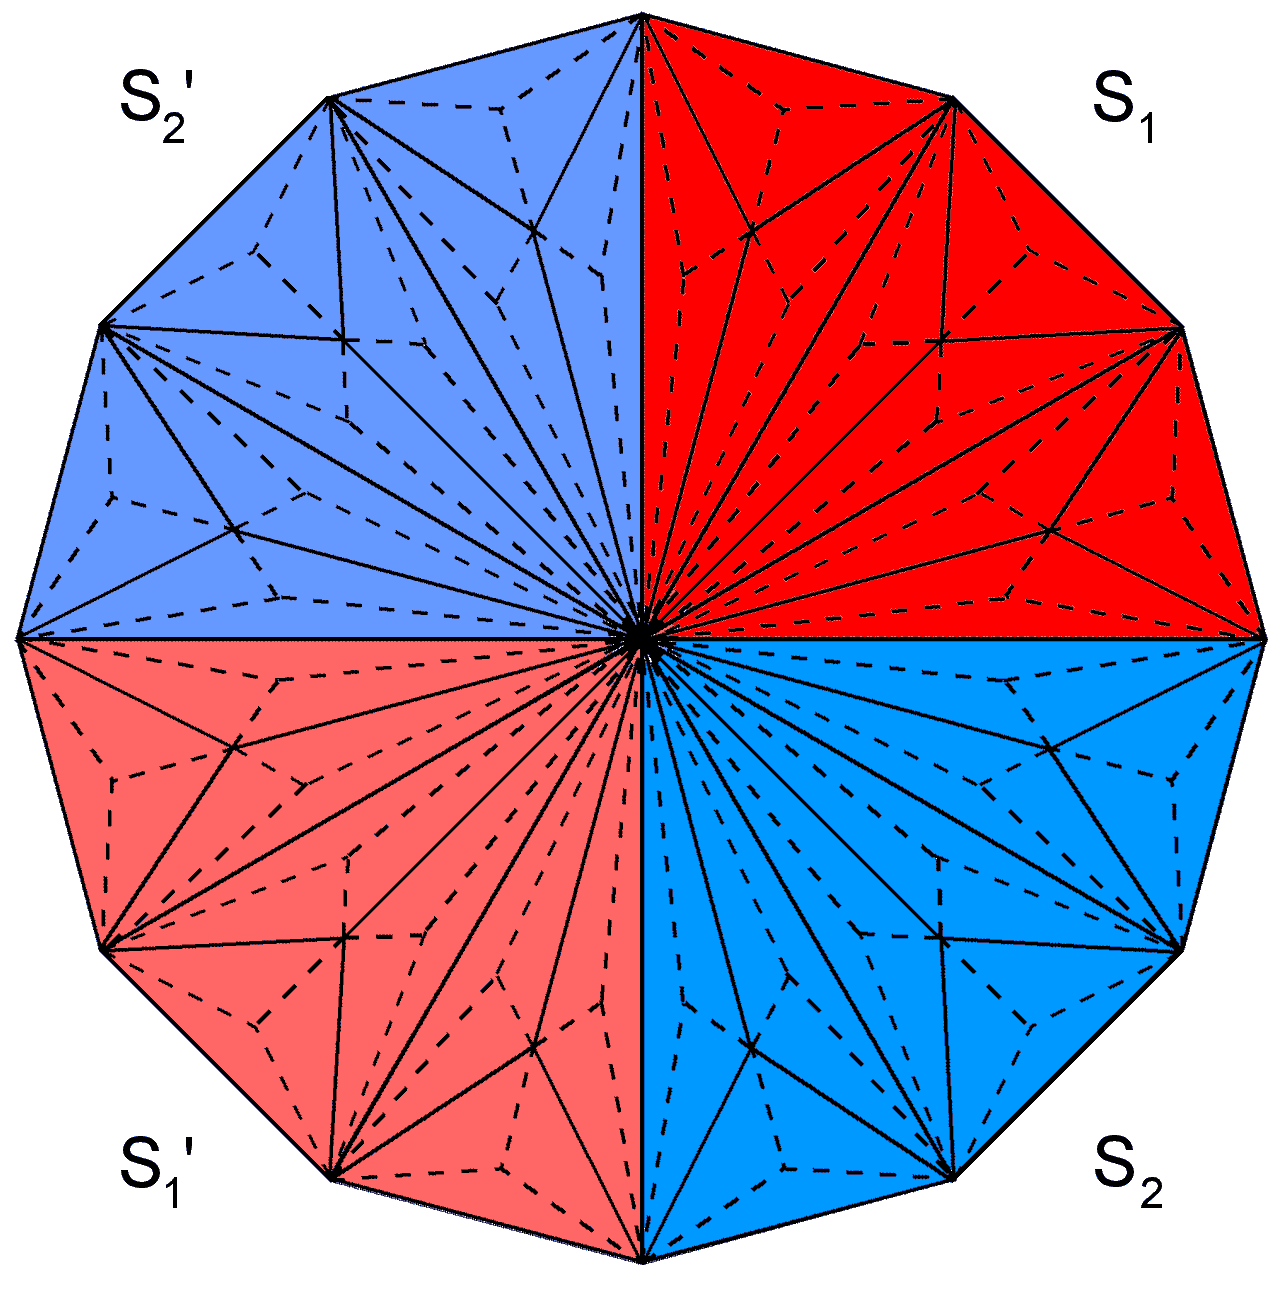 Four sets of 84 geometrical elements in Type C dodecagon